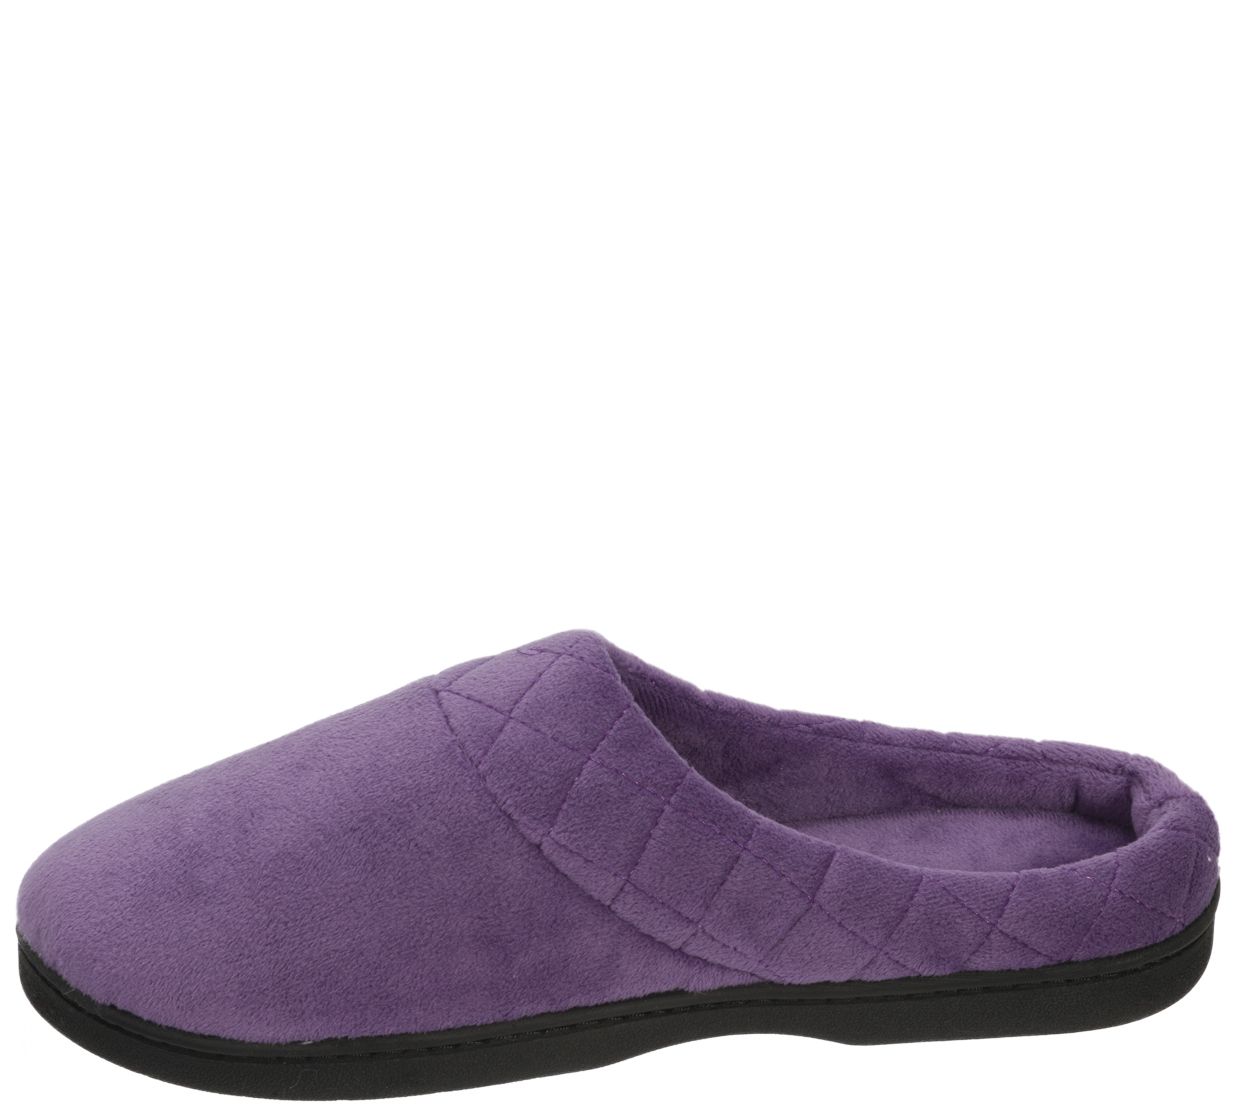 Dearfoams Quilted Cuff Velour Clog Slippers -Darcy - QVC.com